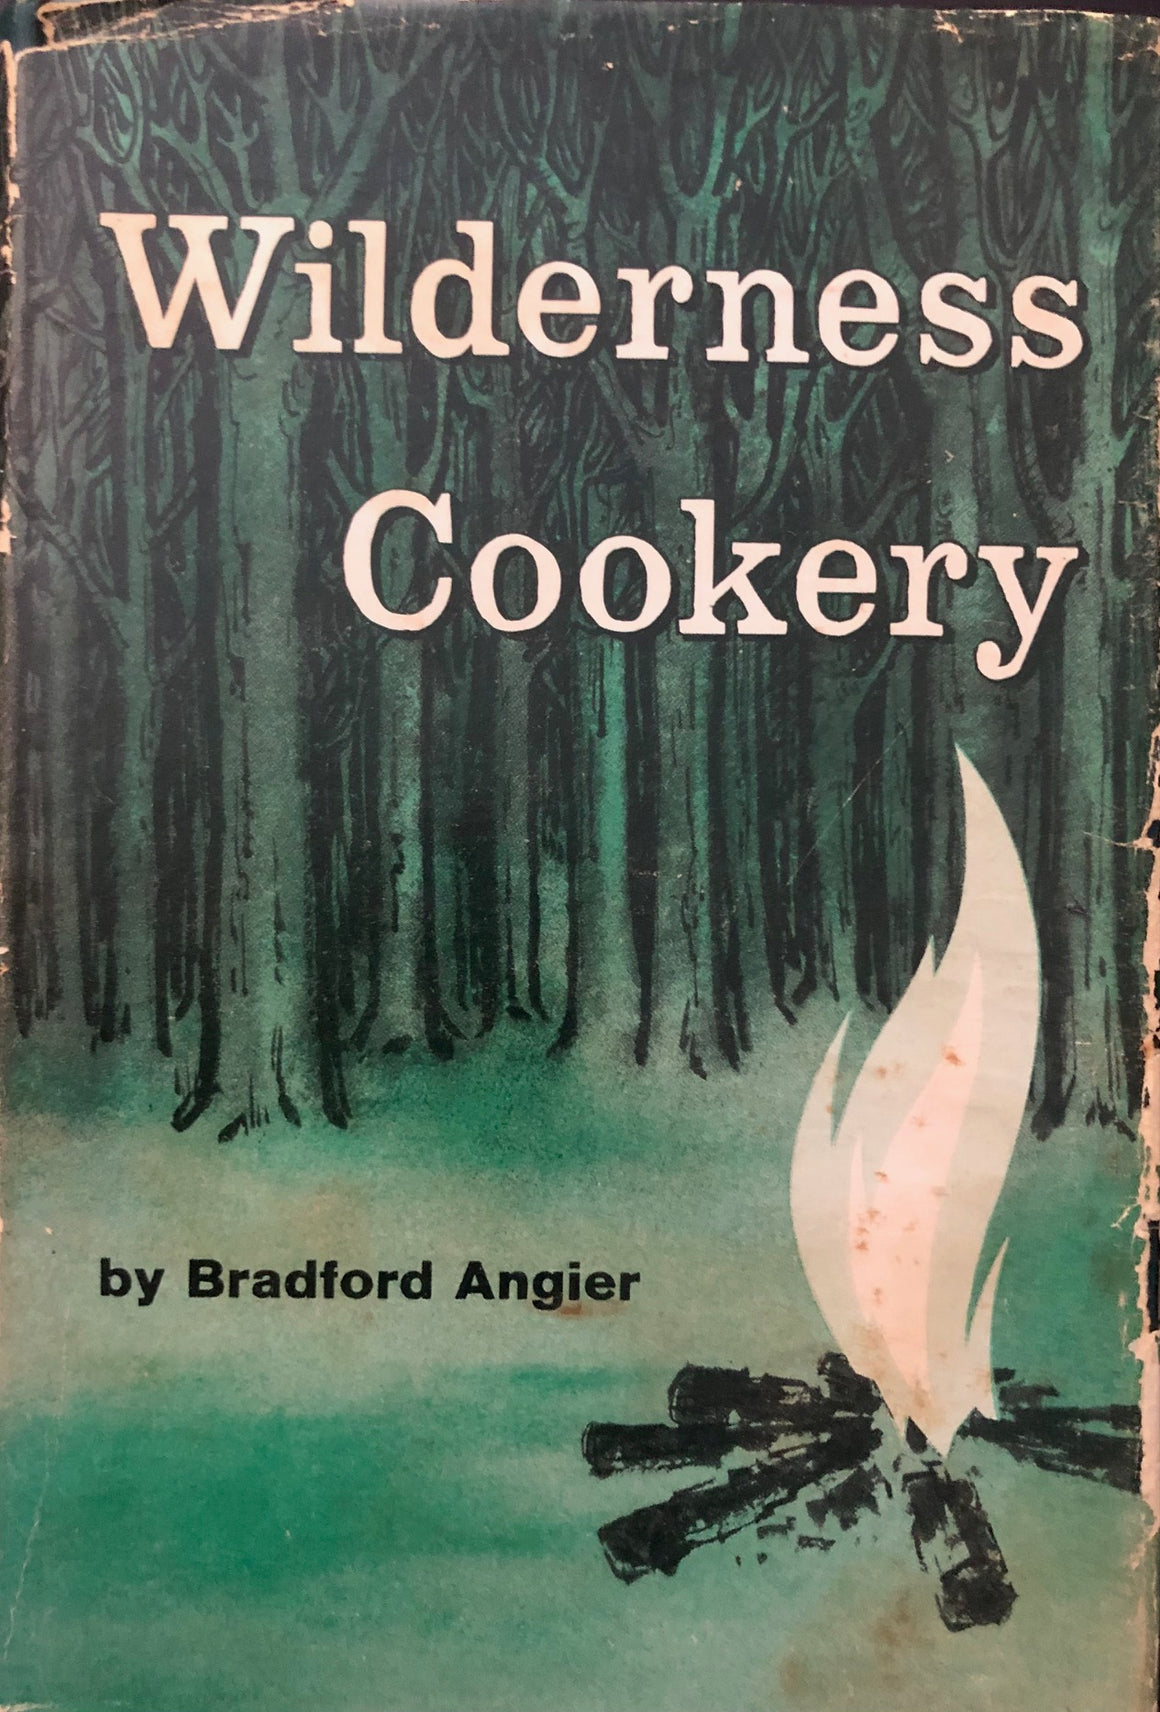 (*NEW ARRIVAL*) (Camping) Bradford Angier. Wilderness Cookery.